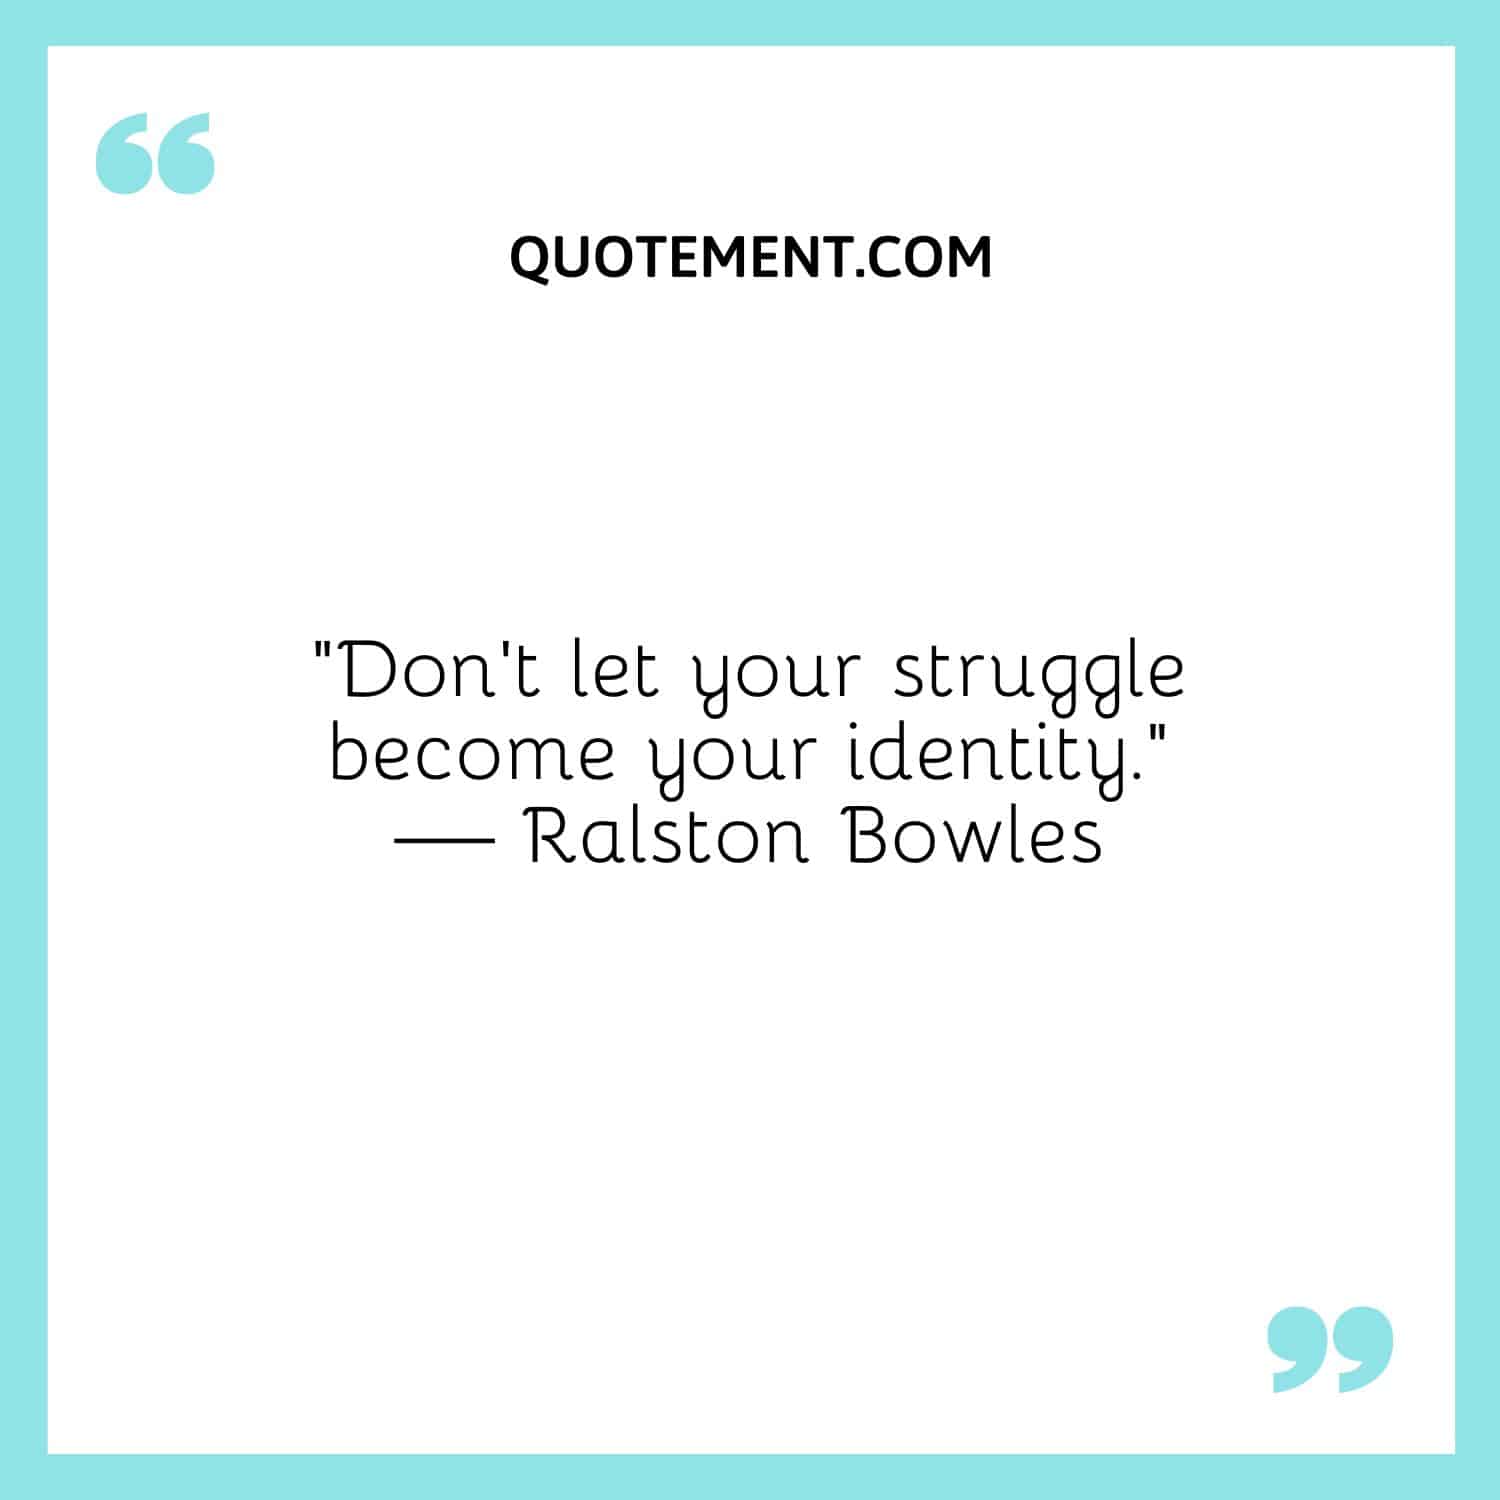 Don’t let your struggle become your identity